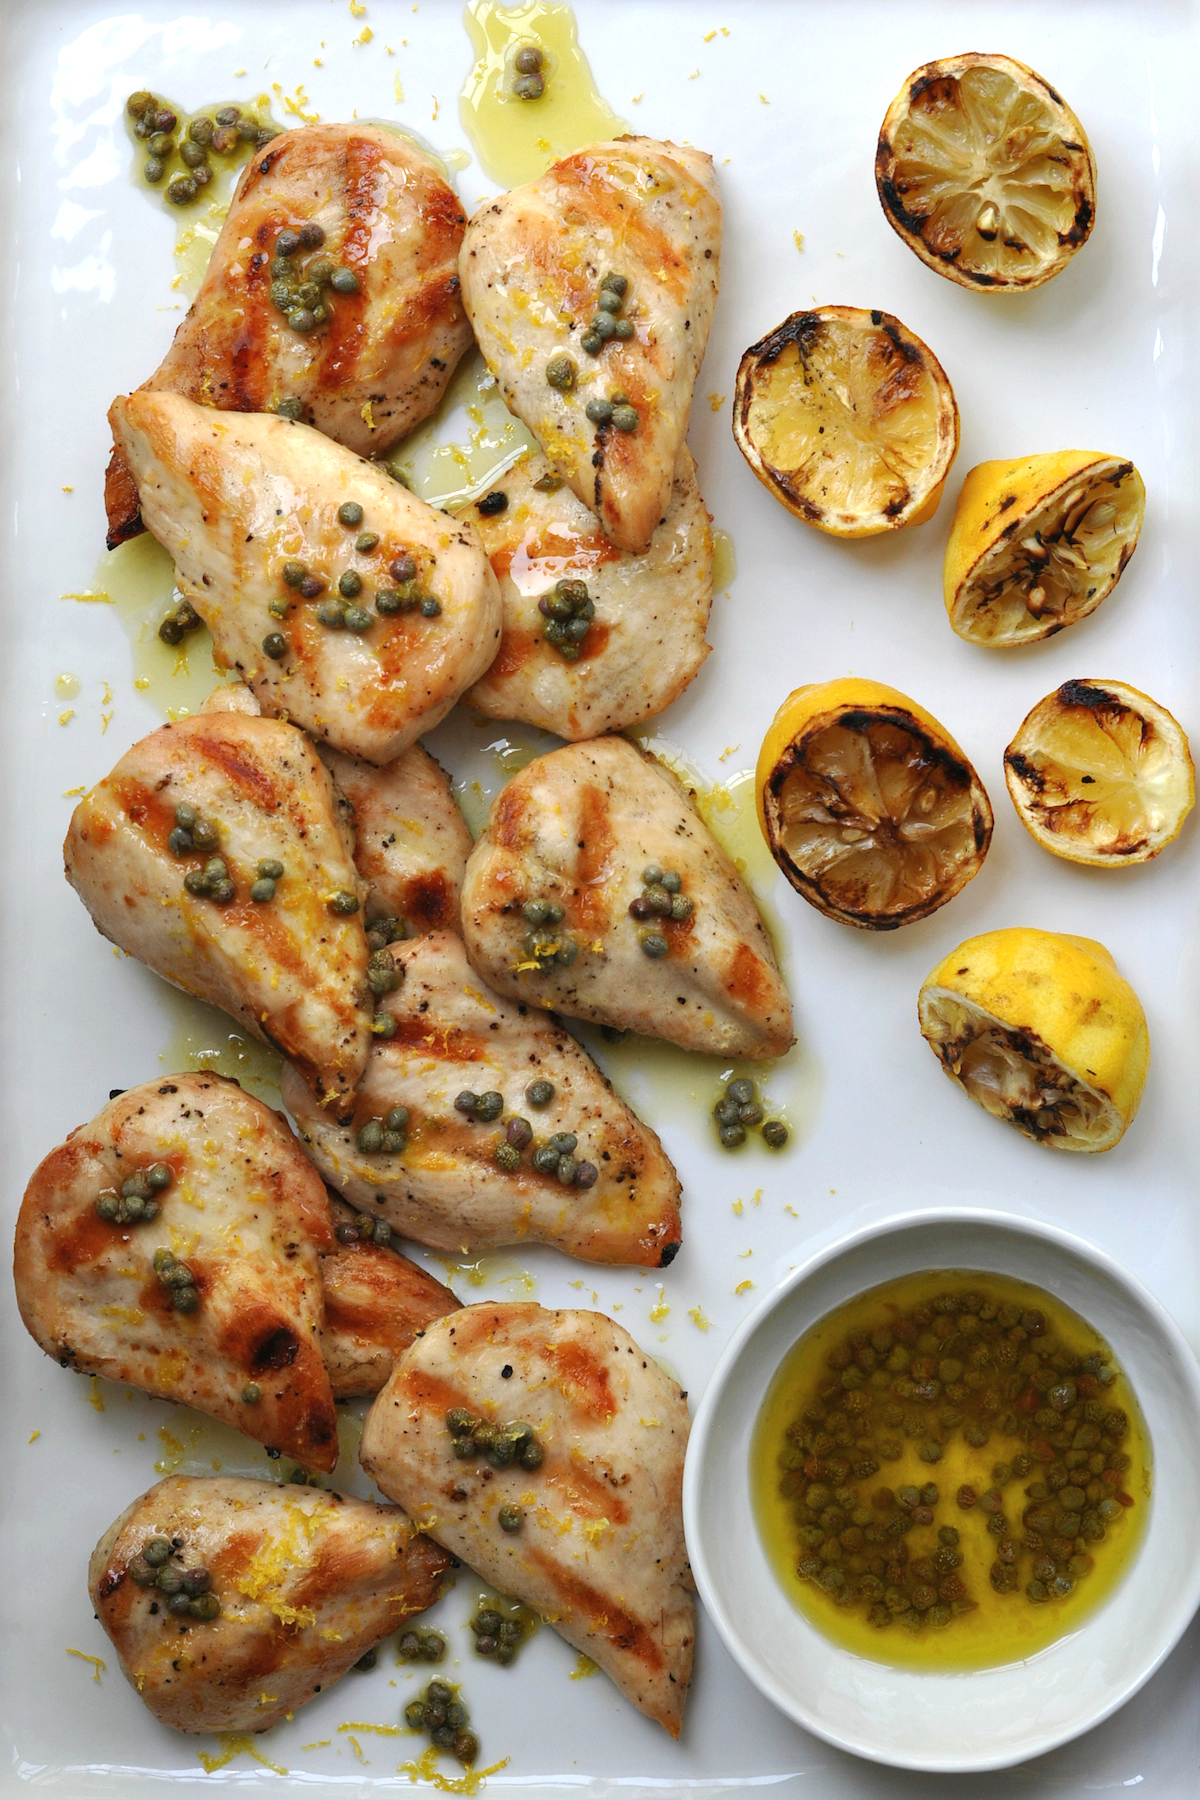 Grilled Chicken with Lemon-Caper Sauce